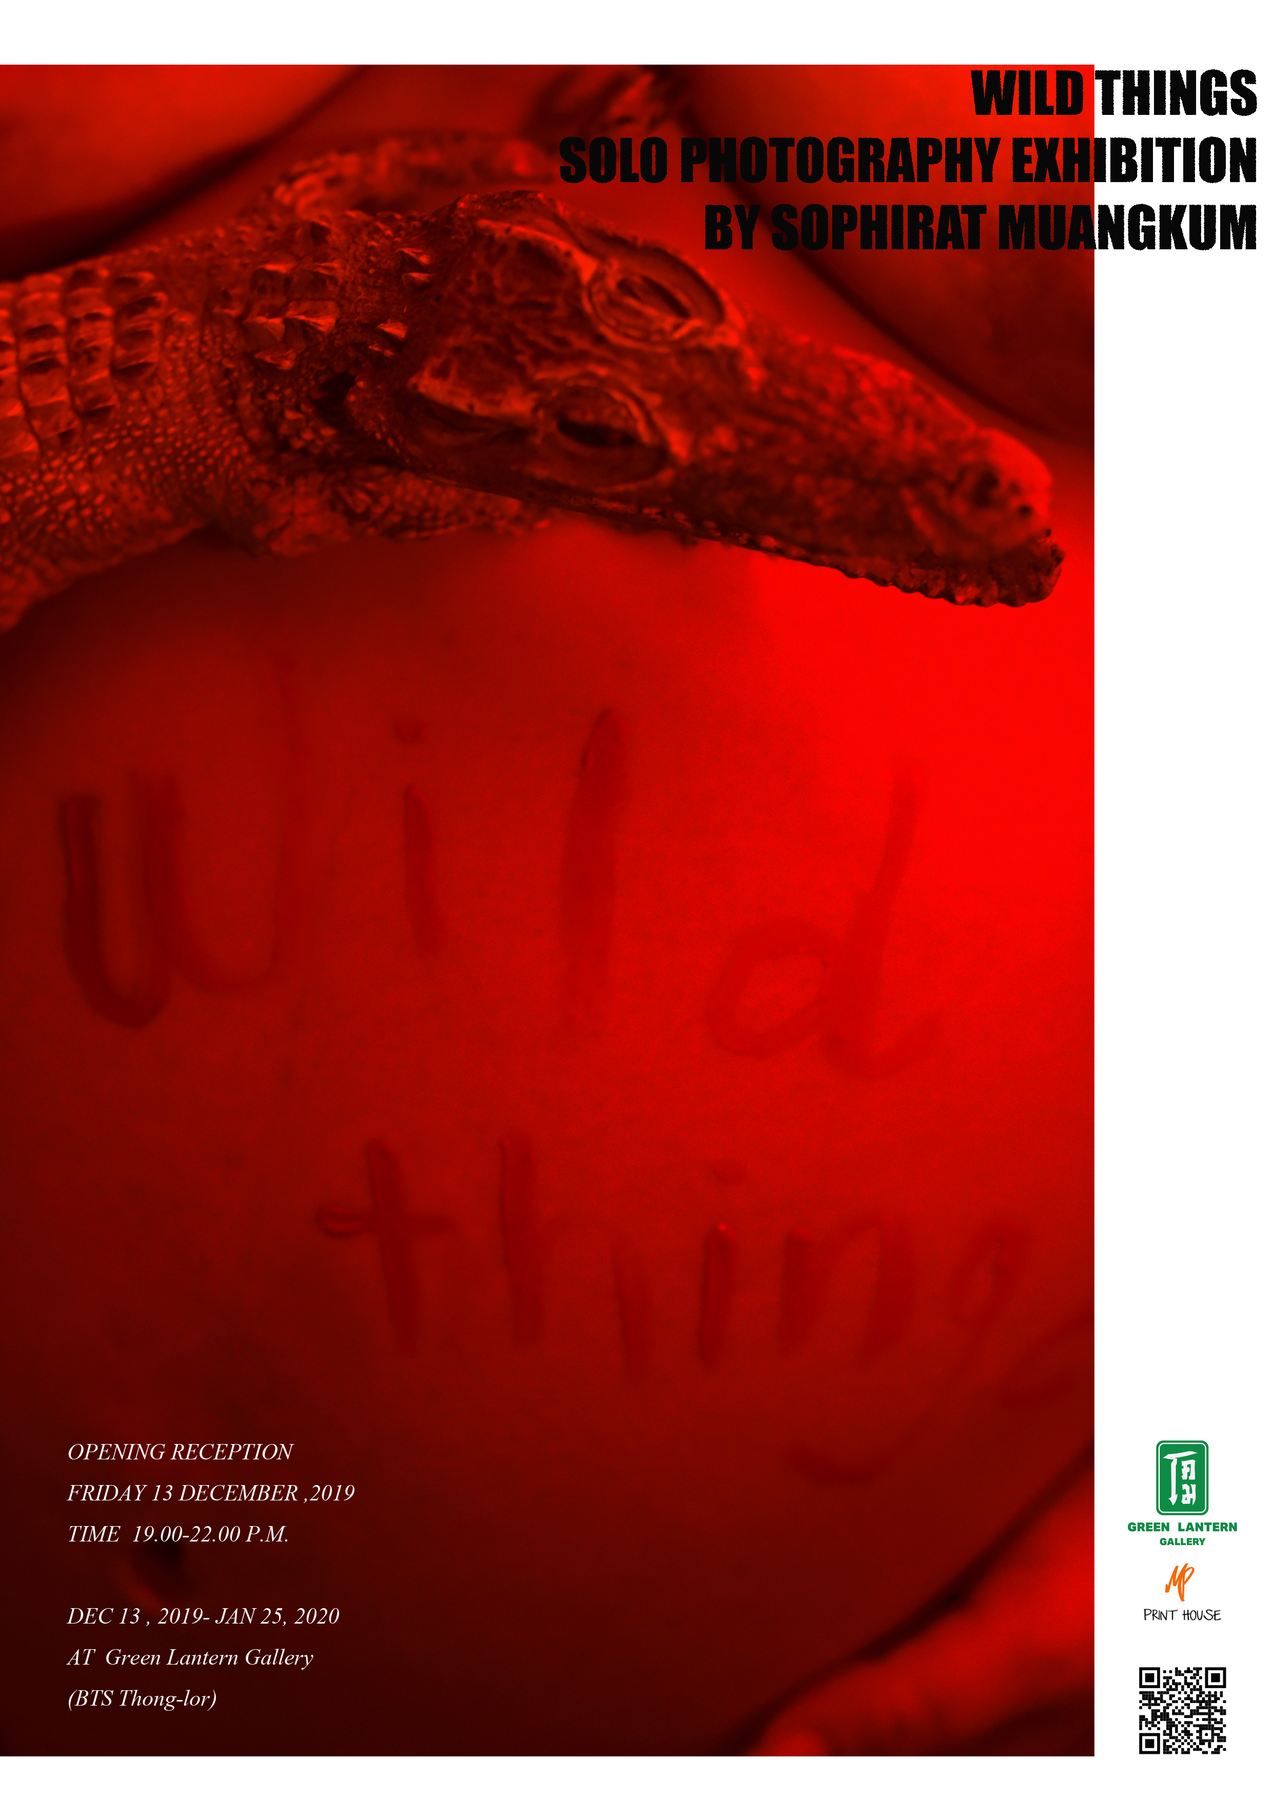 ´ WILD THINGS ´ SOLO PHOTOGRAPHY EXHIBITION BY SOPHIRAT MUANGKUM